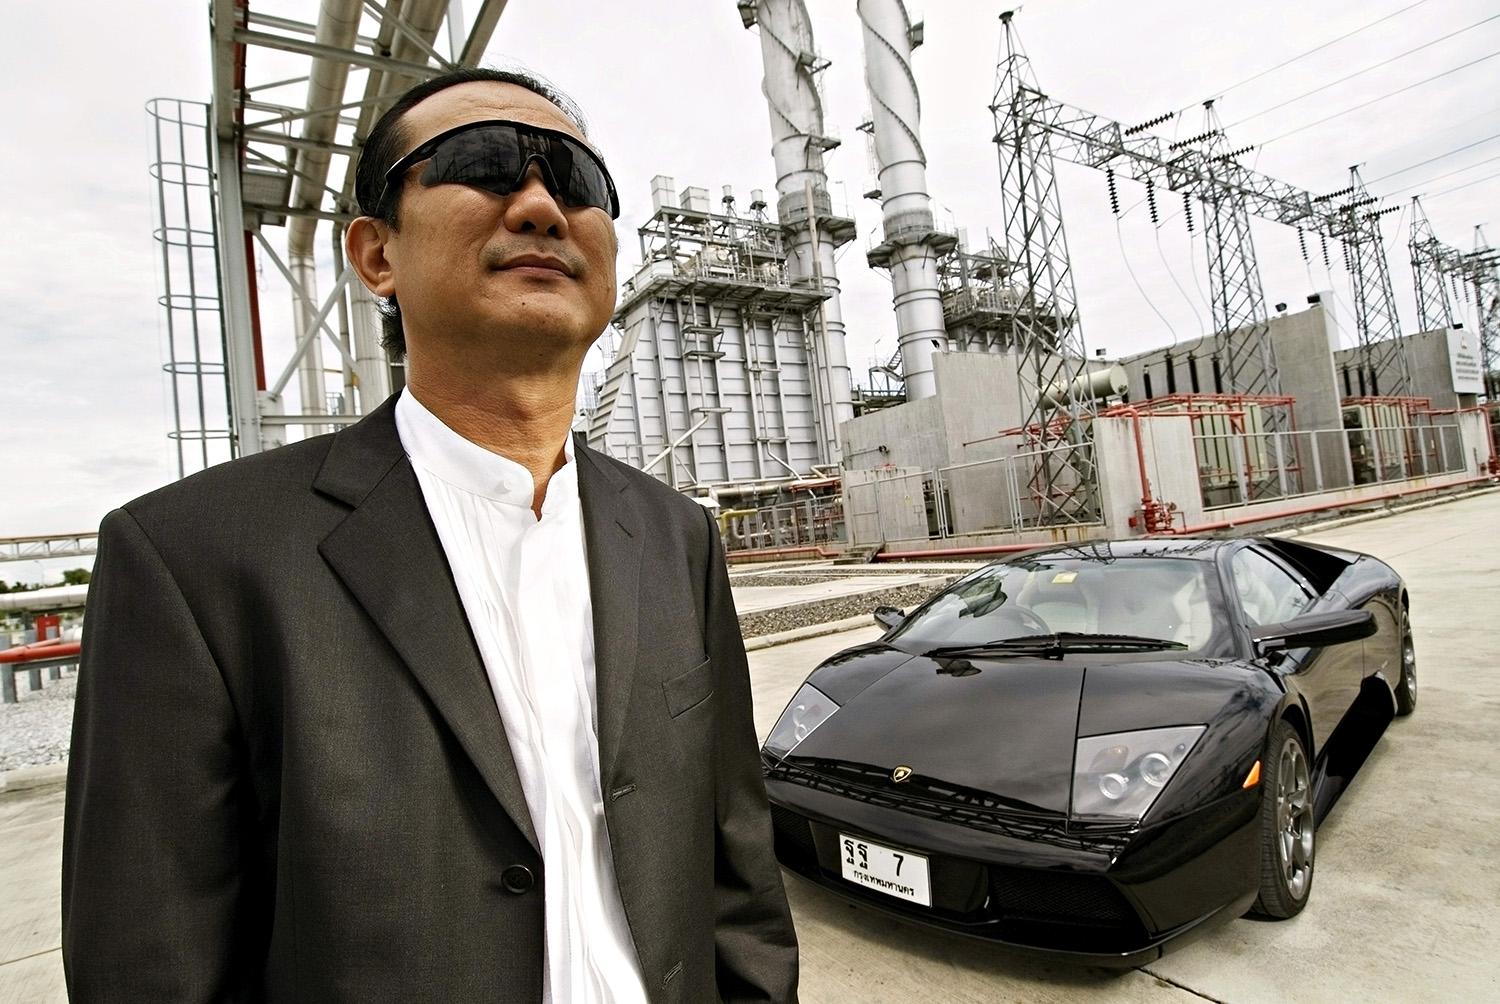 Vikrom Kromadit, CEO of Amata Corp., posing against a backdrop of the power supply plant for the massive Amata Nakorn Industrial Estate.